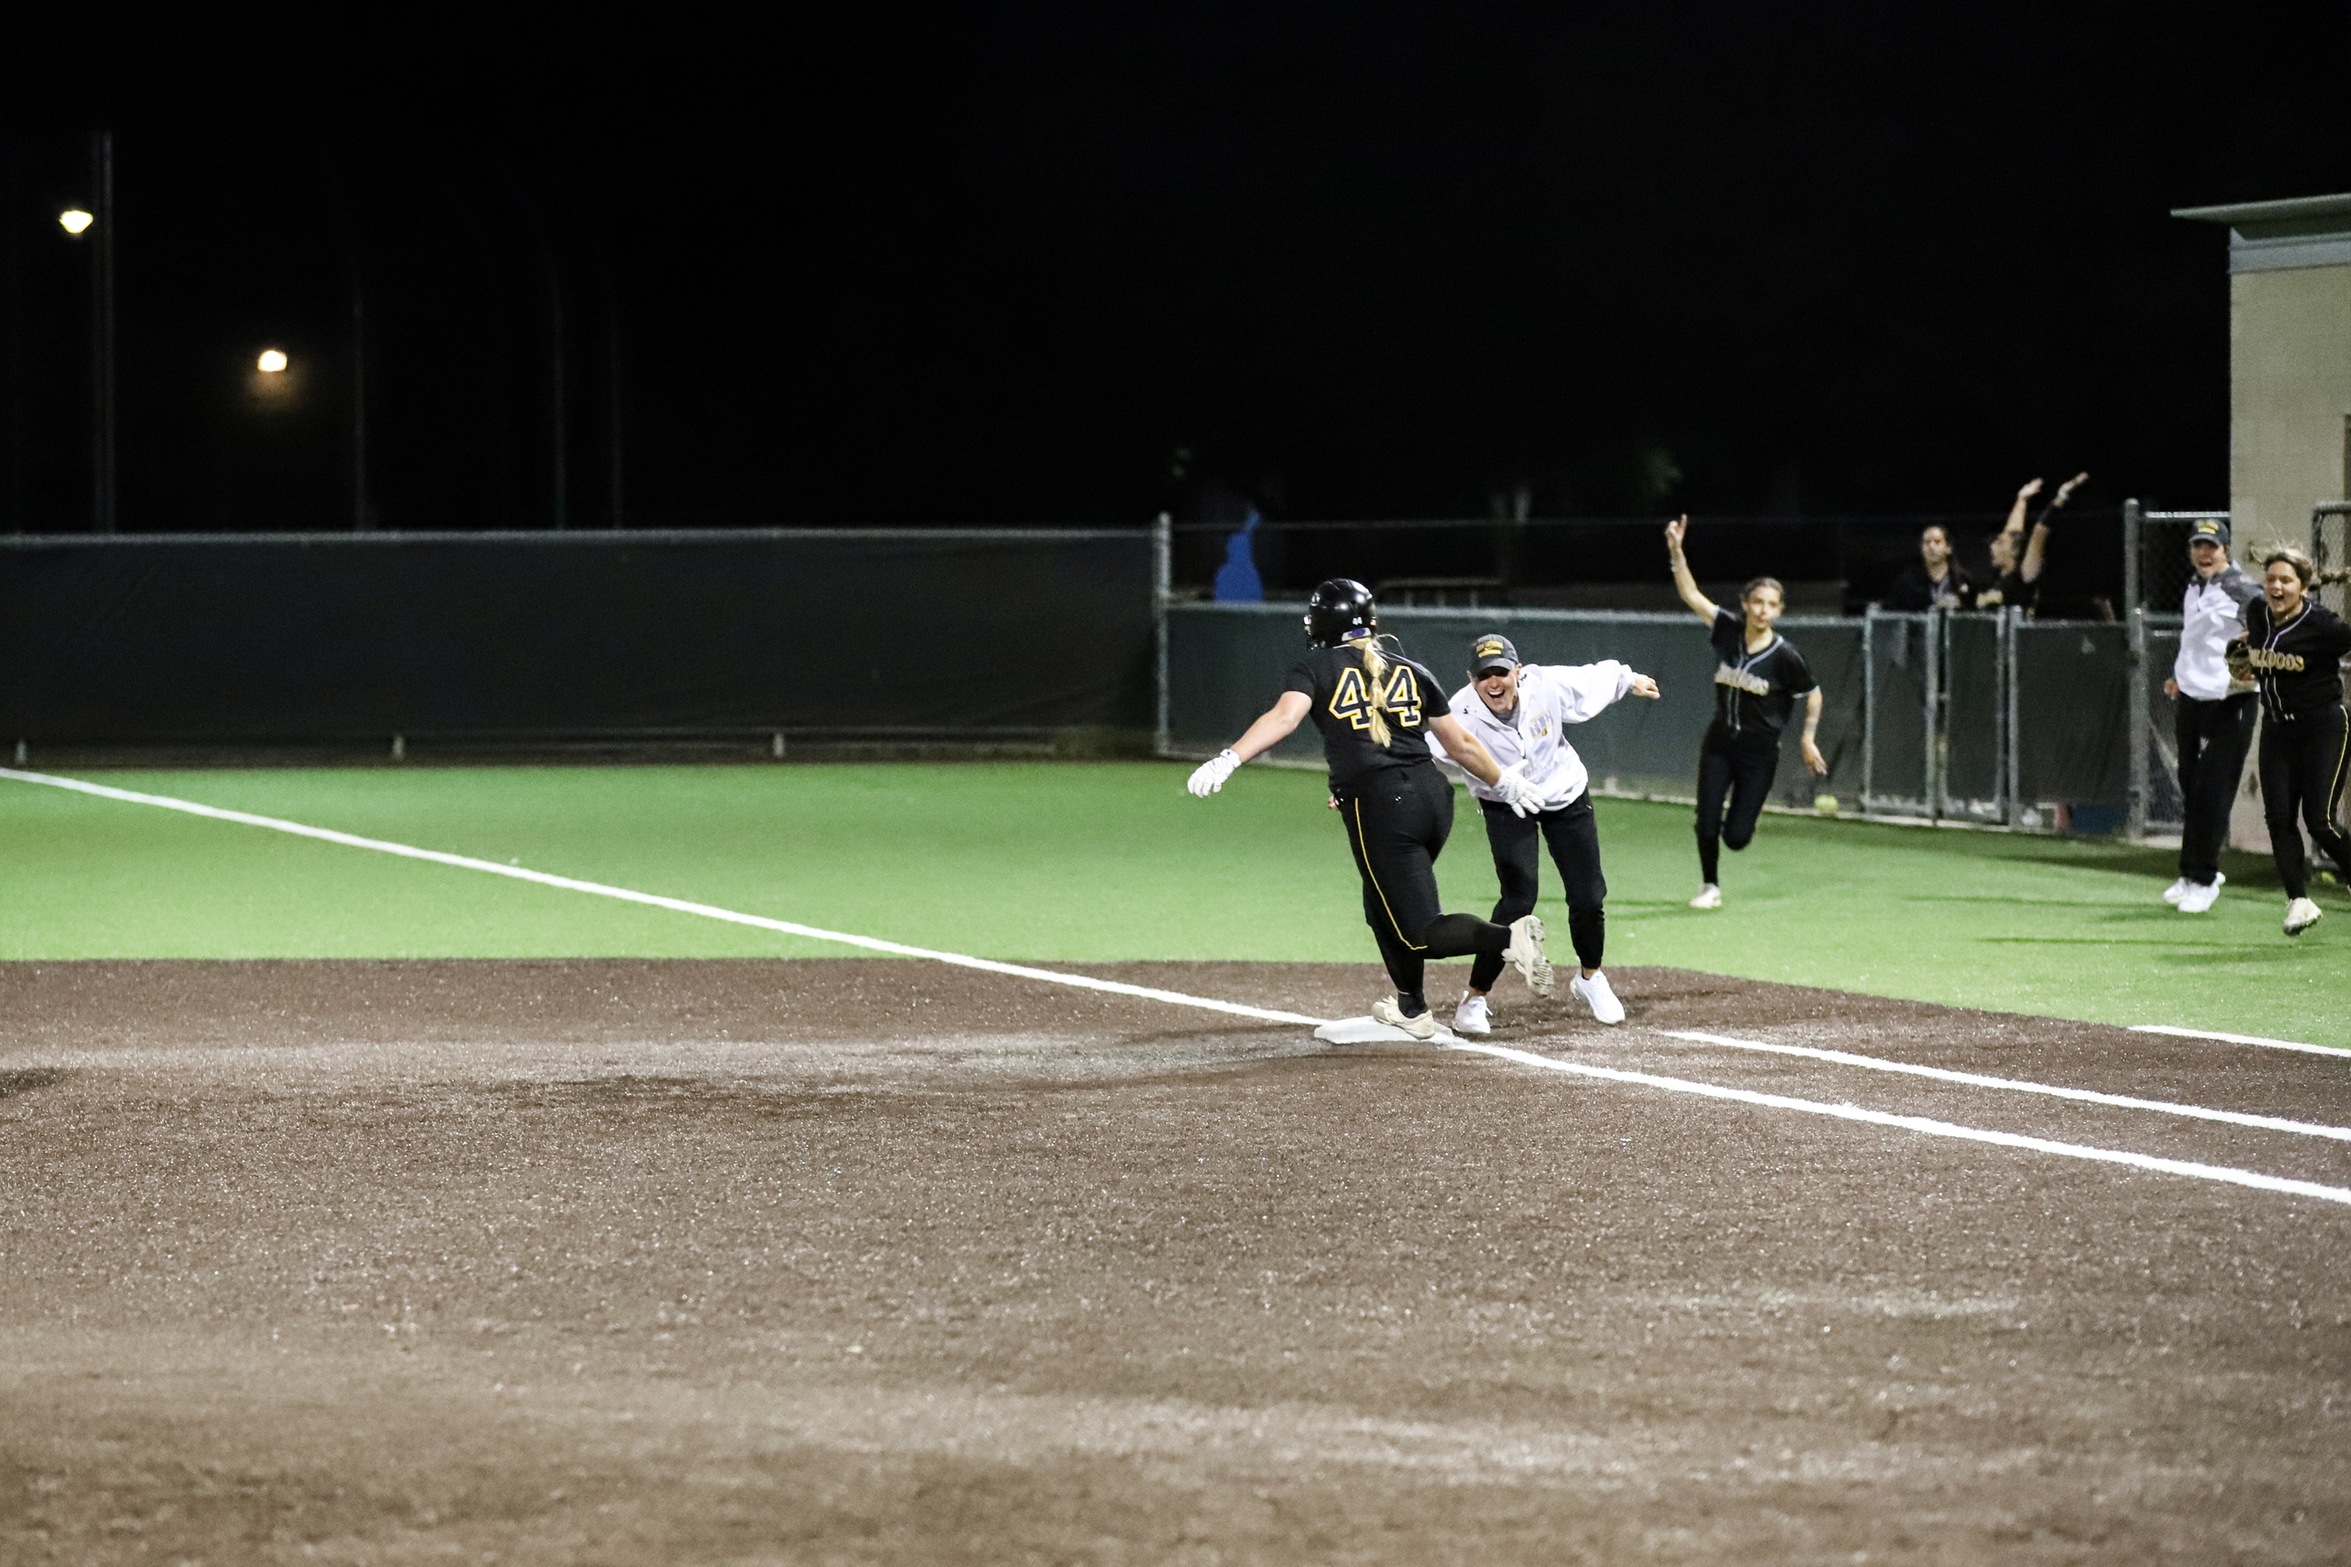 Kylee Jack celebrates with Coach Lockley following home run (photo by Bryce Hayes)